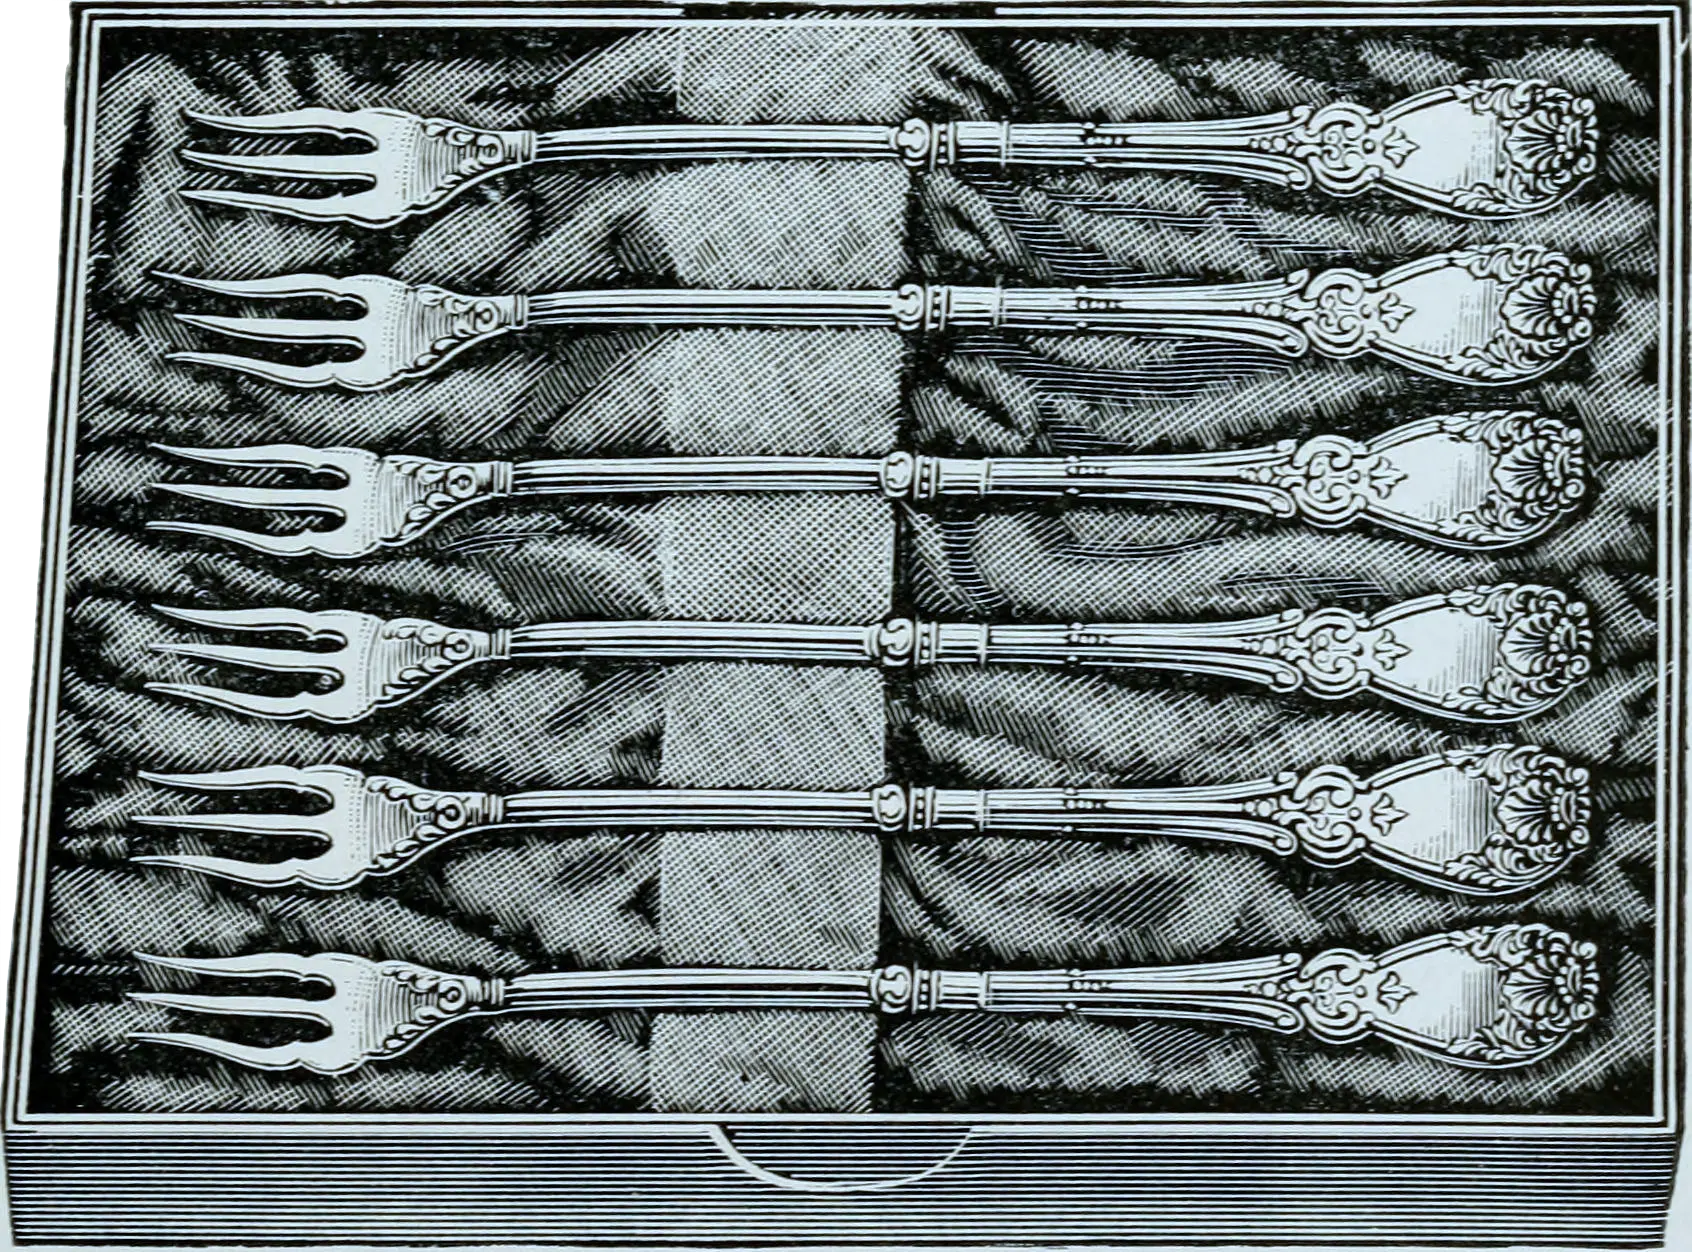 A row of forks in an old woodcut illustration